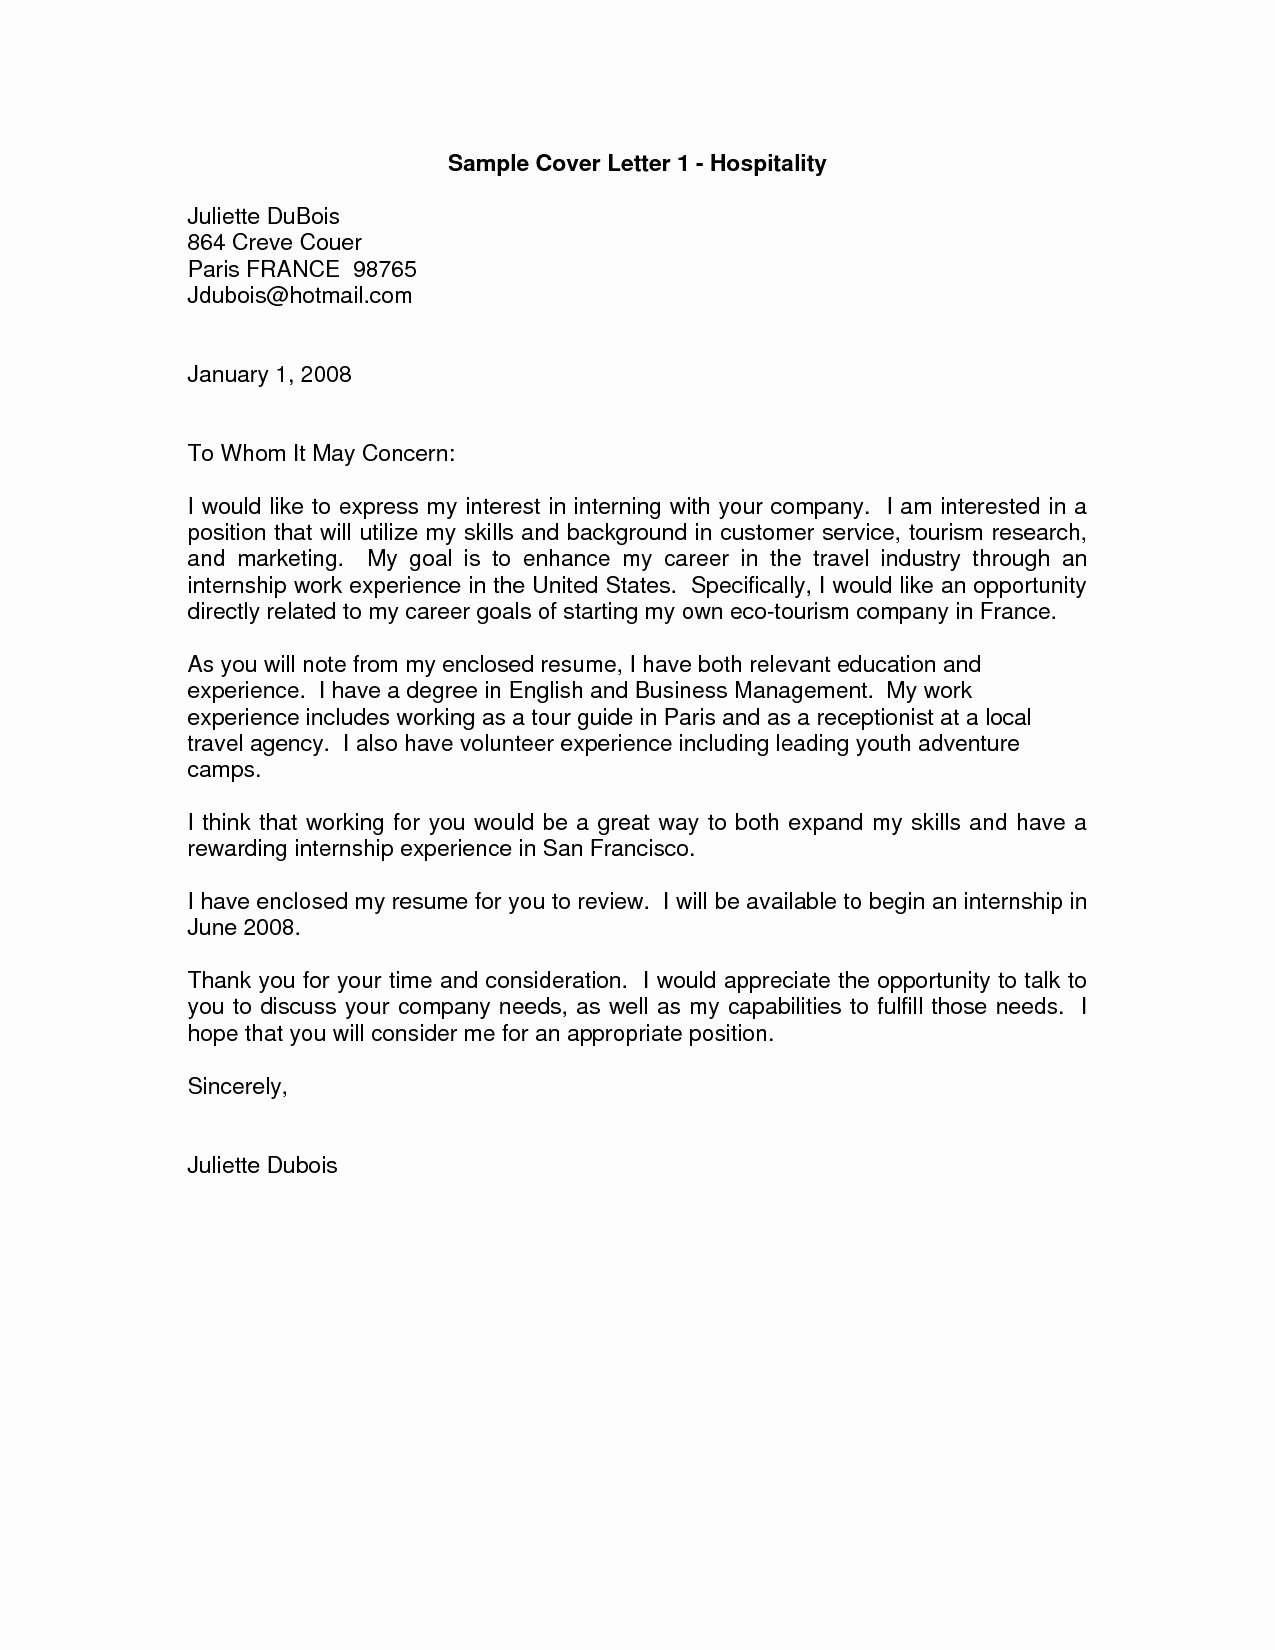 Letter Of Concern Sample Awesome Business Letter Example to whom It May Concern